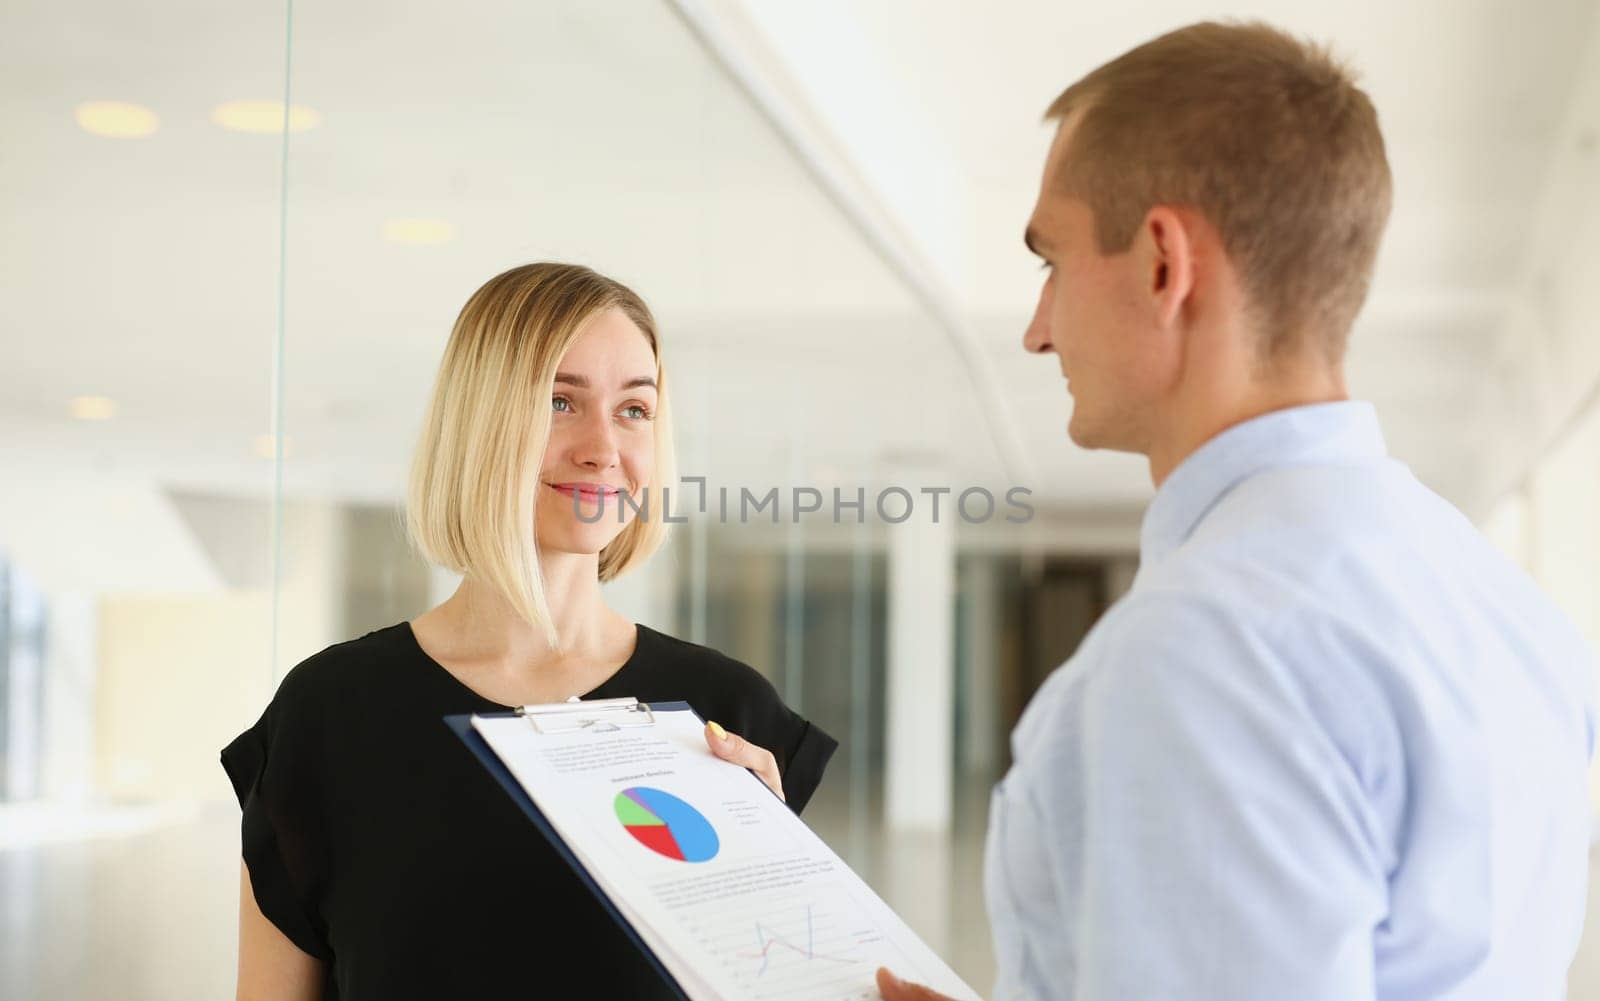 Beautiful woman portrait at workplace examining financial statistics. White collar worker at workspace exchange market startup irs certified public accountant internal revenue officer concept